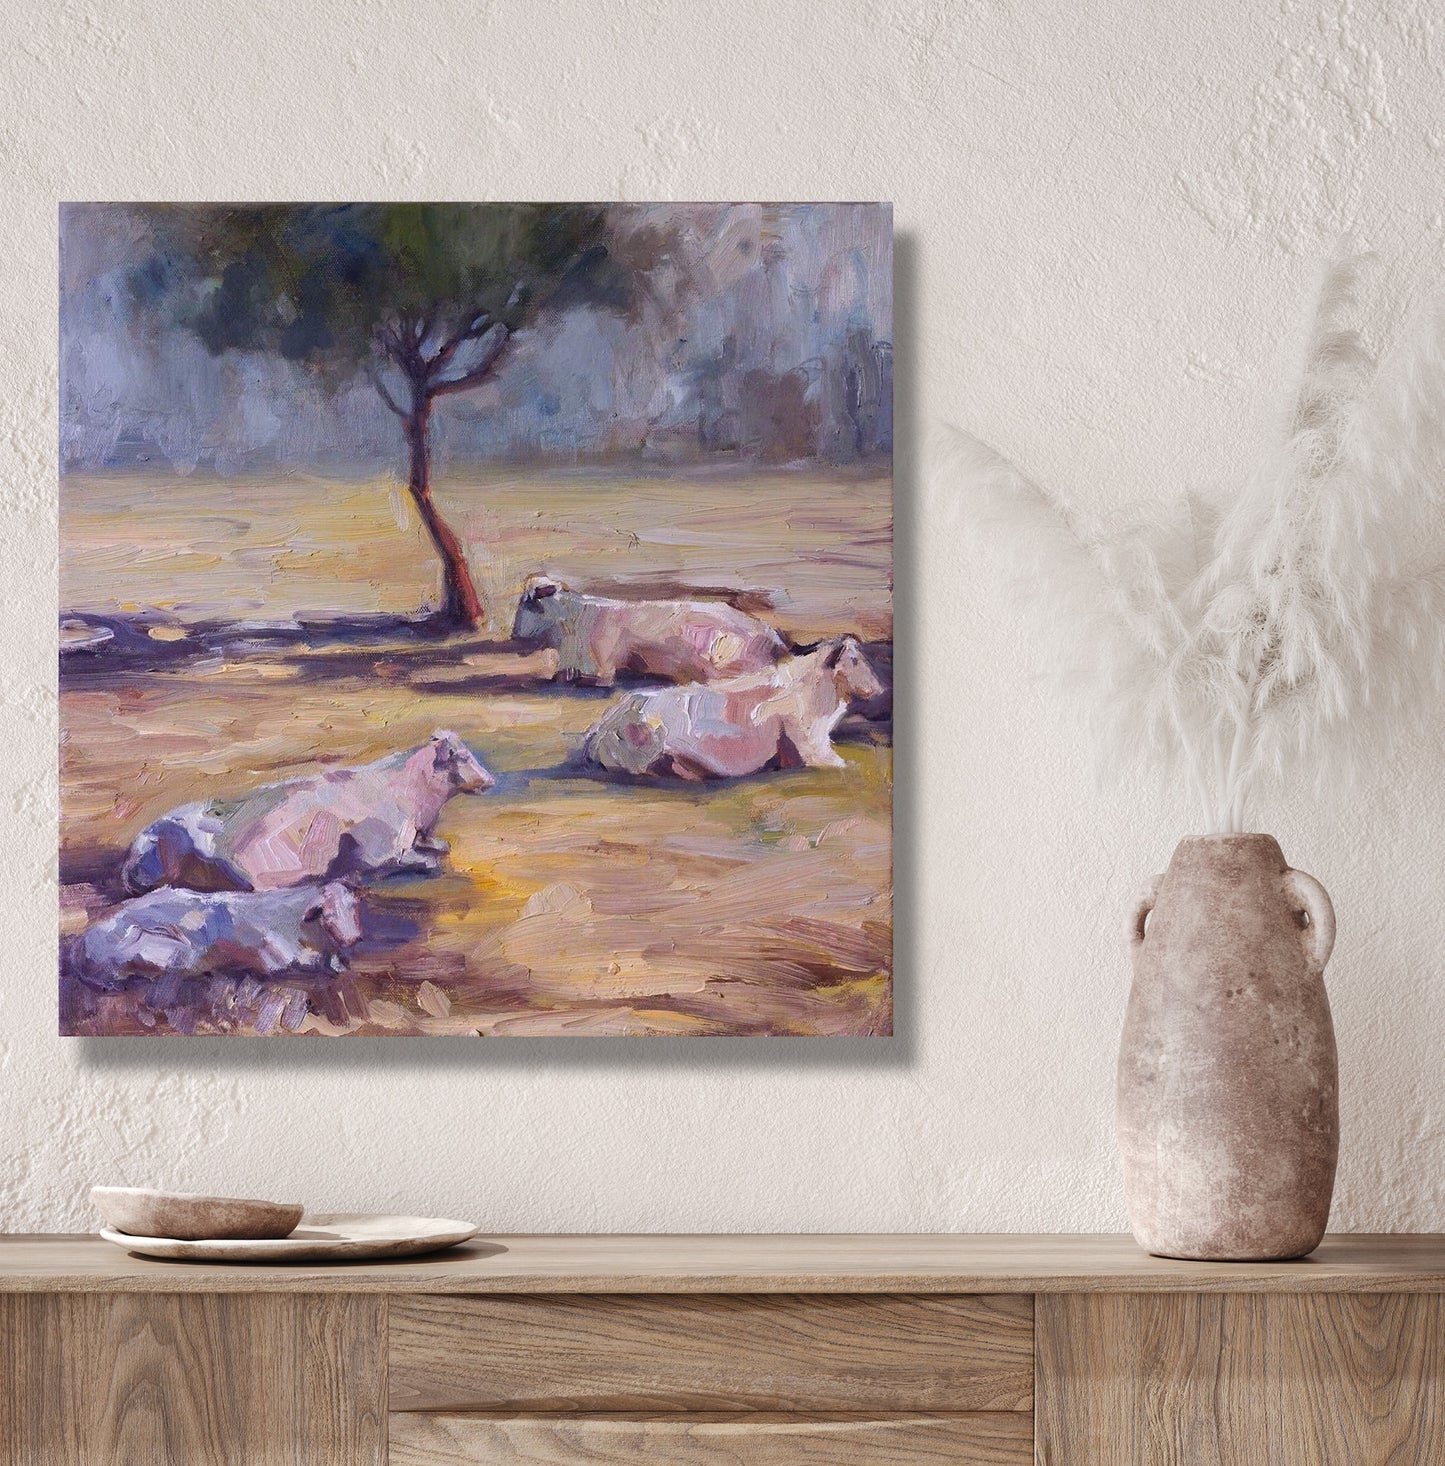 Resting Cows Glossy Poster Print